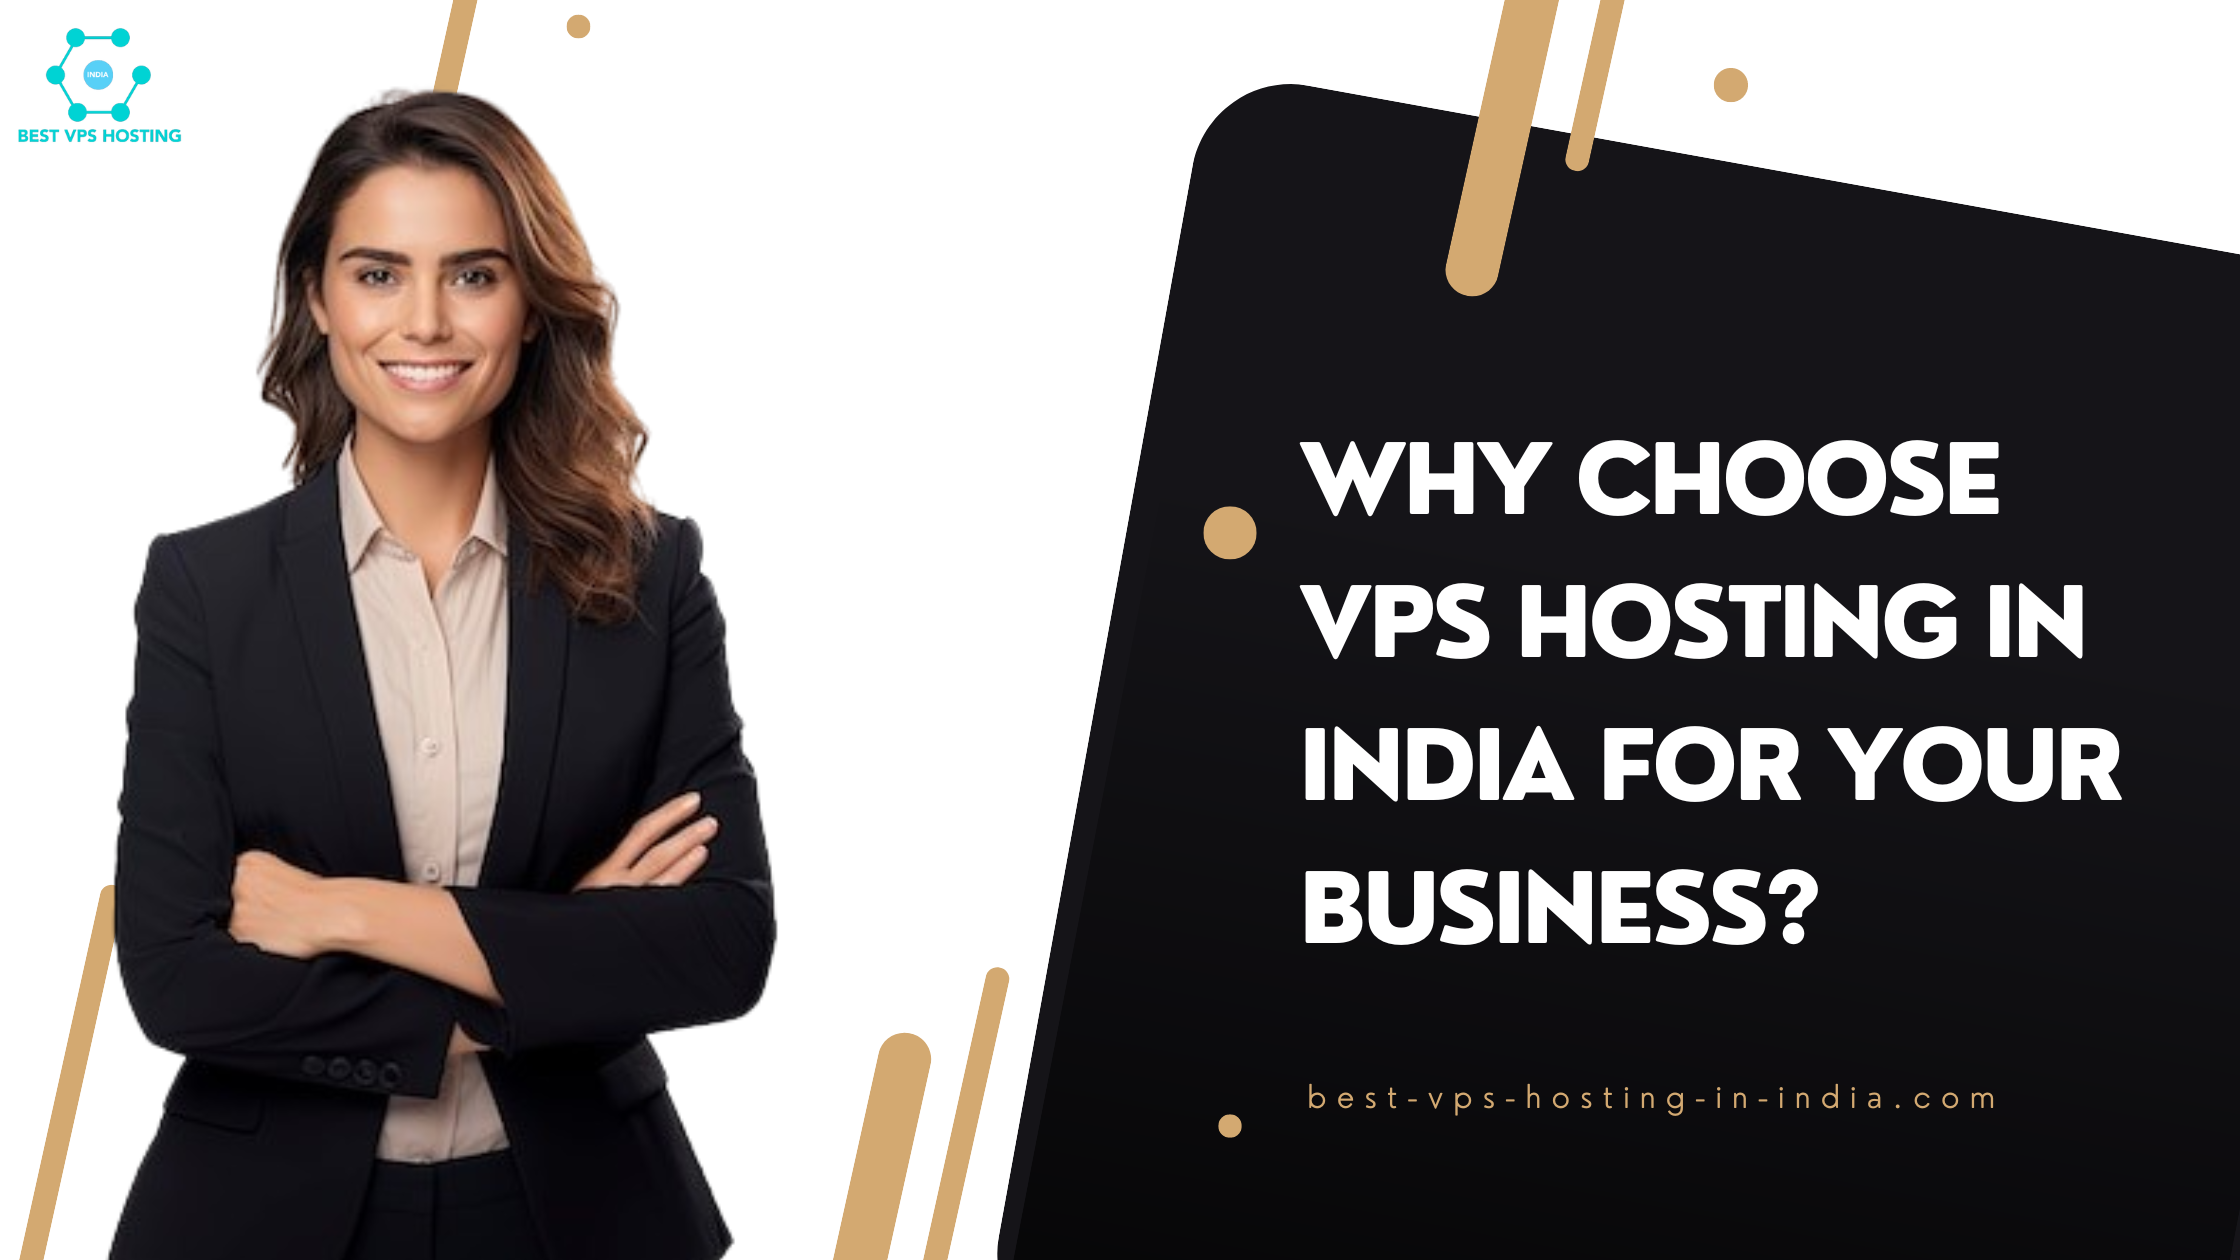 Why Choose VPS Hosting in India for Your Business?